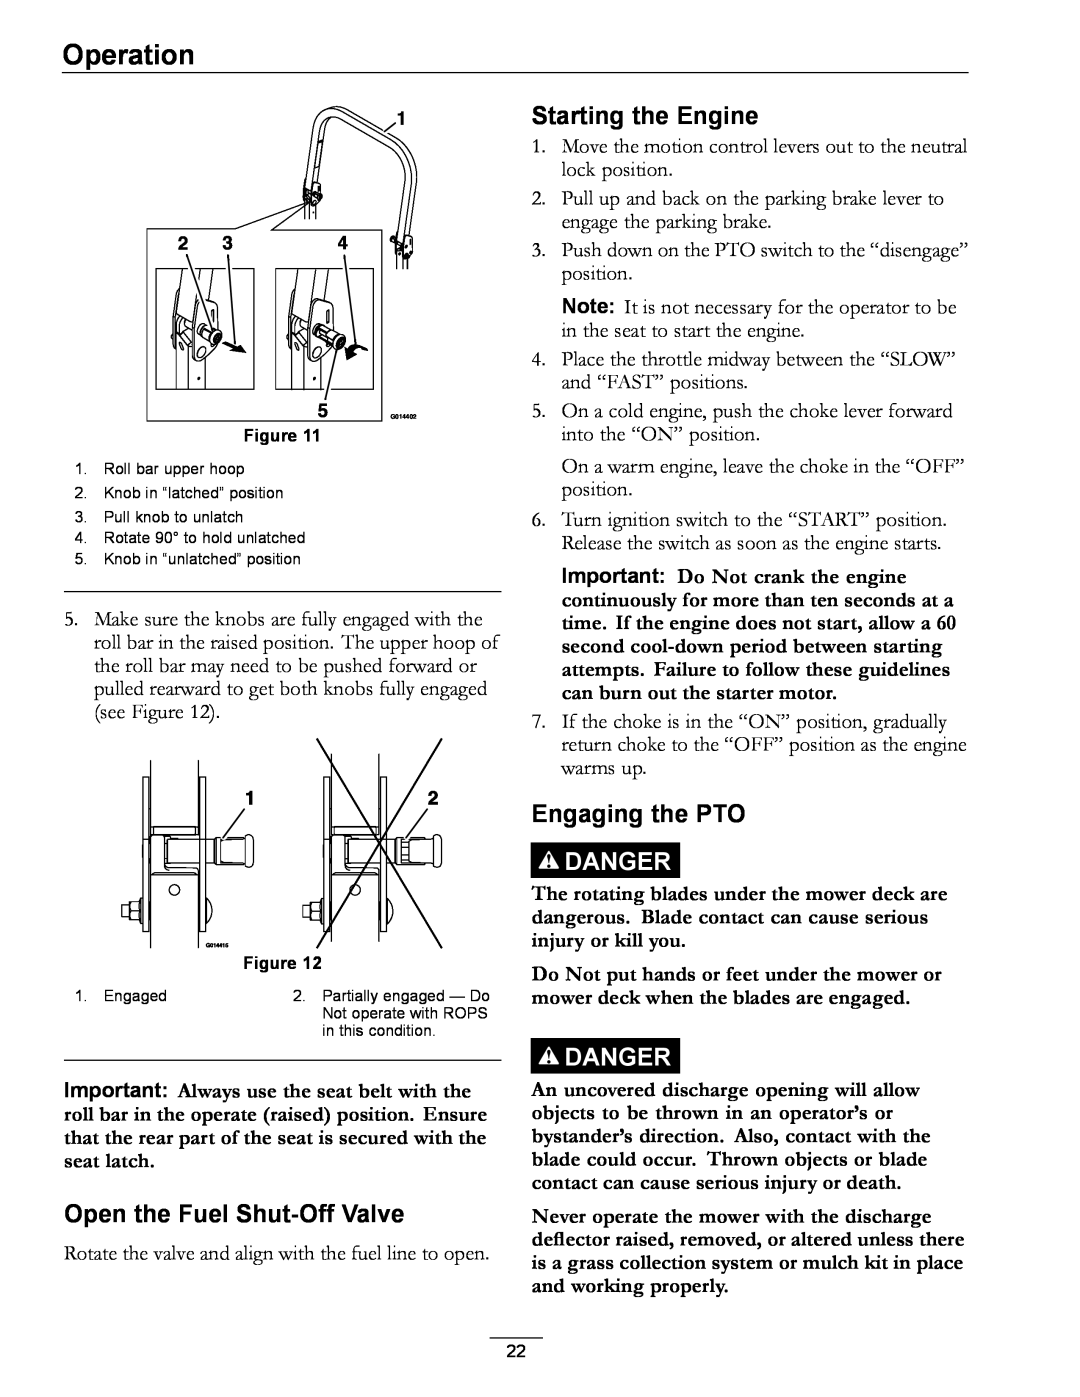 Exmark 920 manual Open the Fuel Shut-Off Valve, Starting the Engine, Engaging the PTO, Operation, Danger 